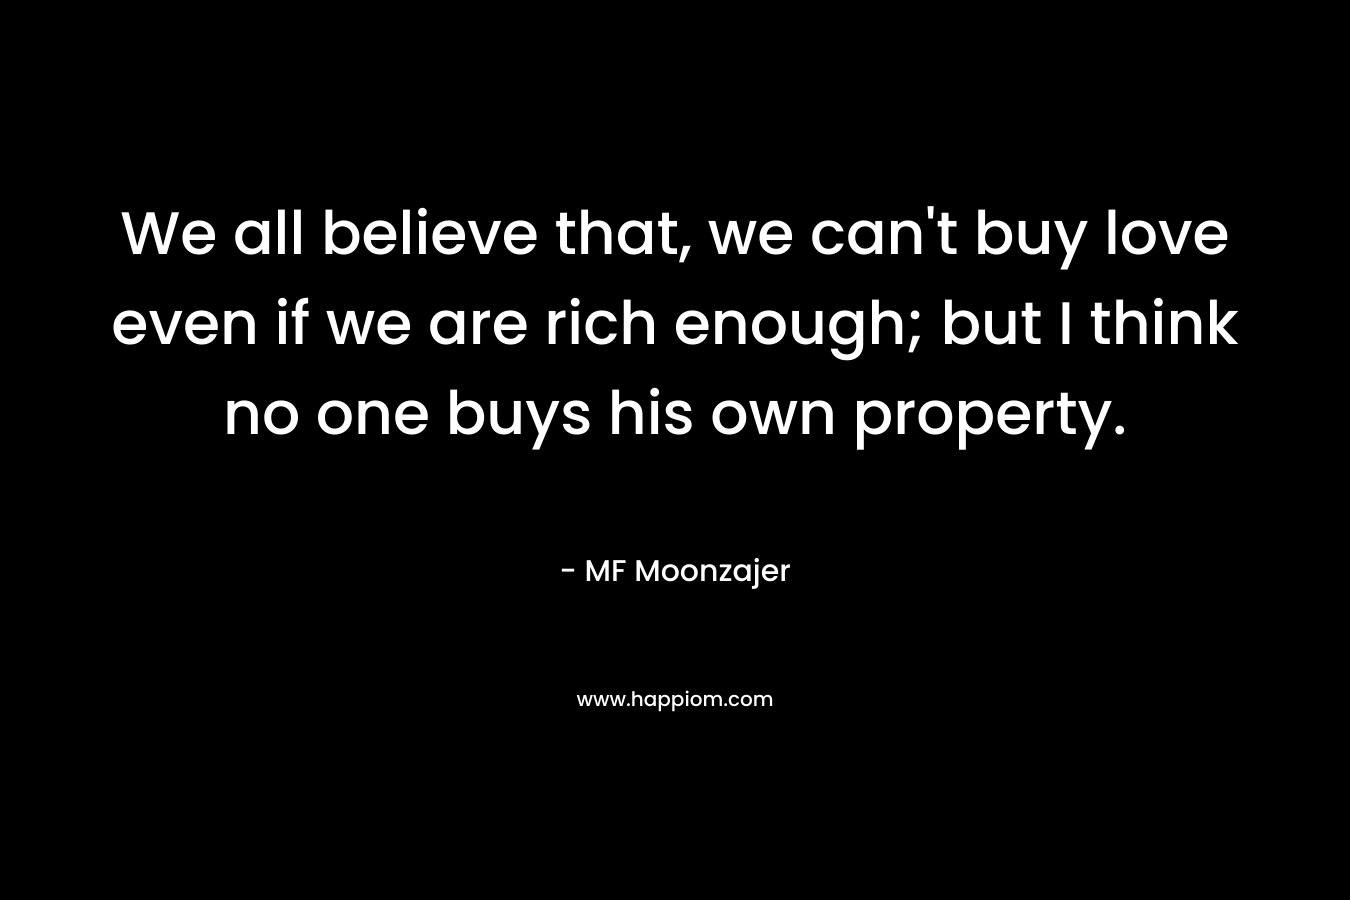 We all believe that, we can't buy love even if we are rich enough; but I think no one buys his own property.